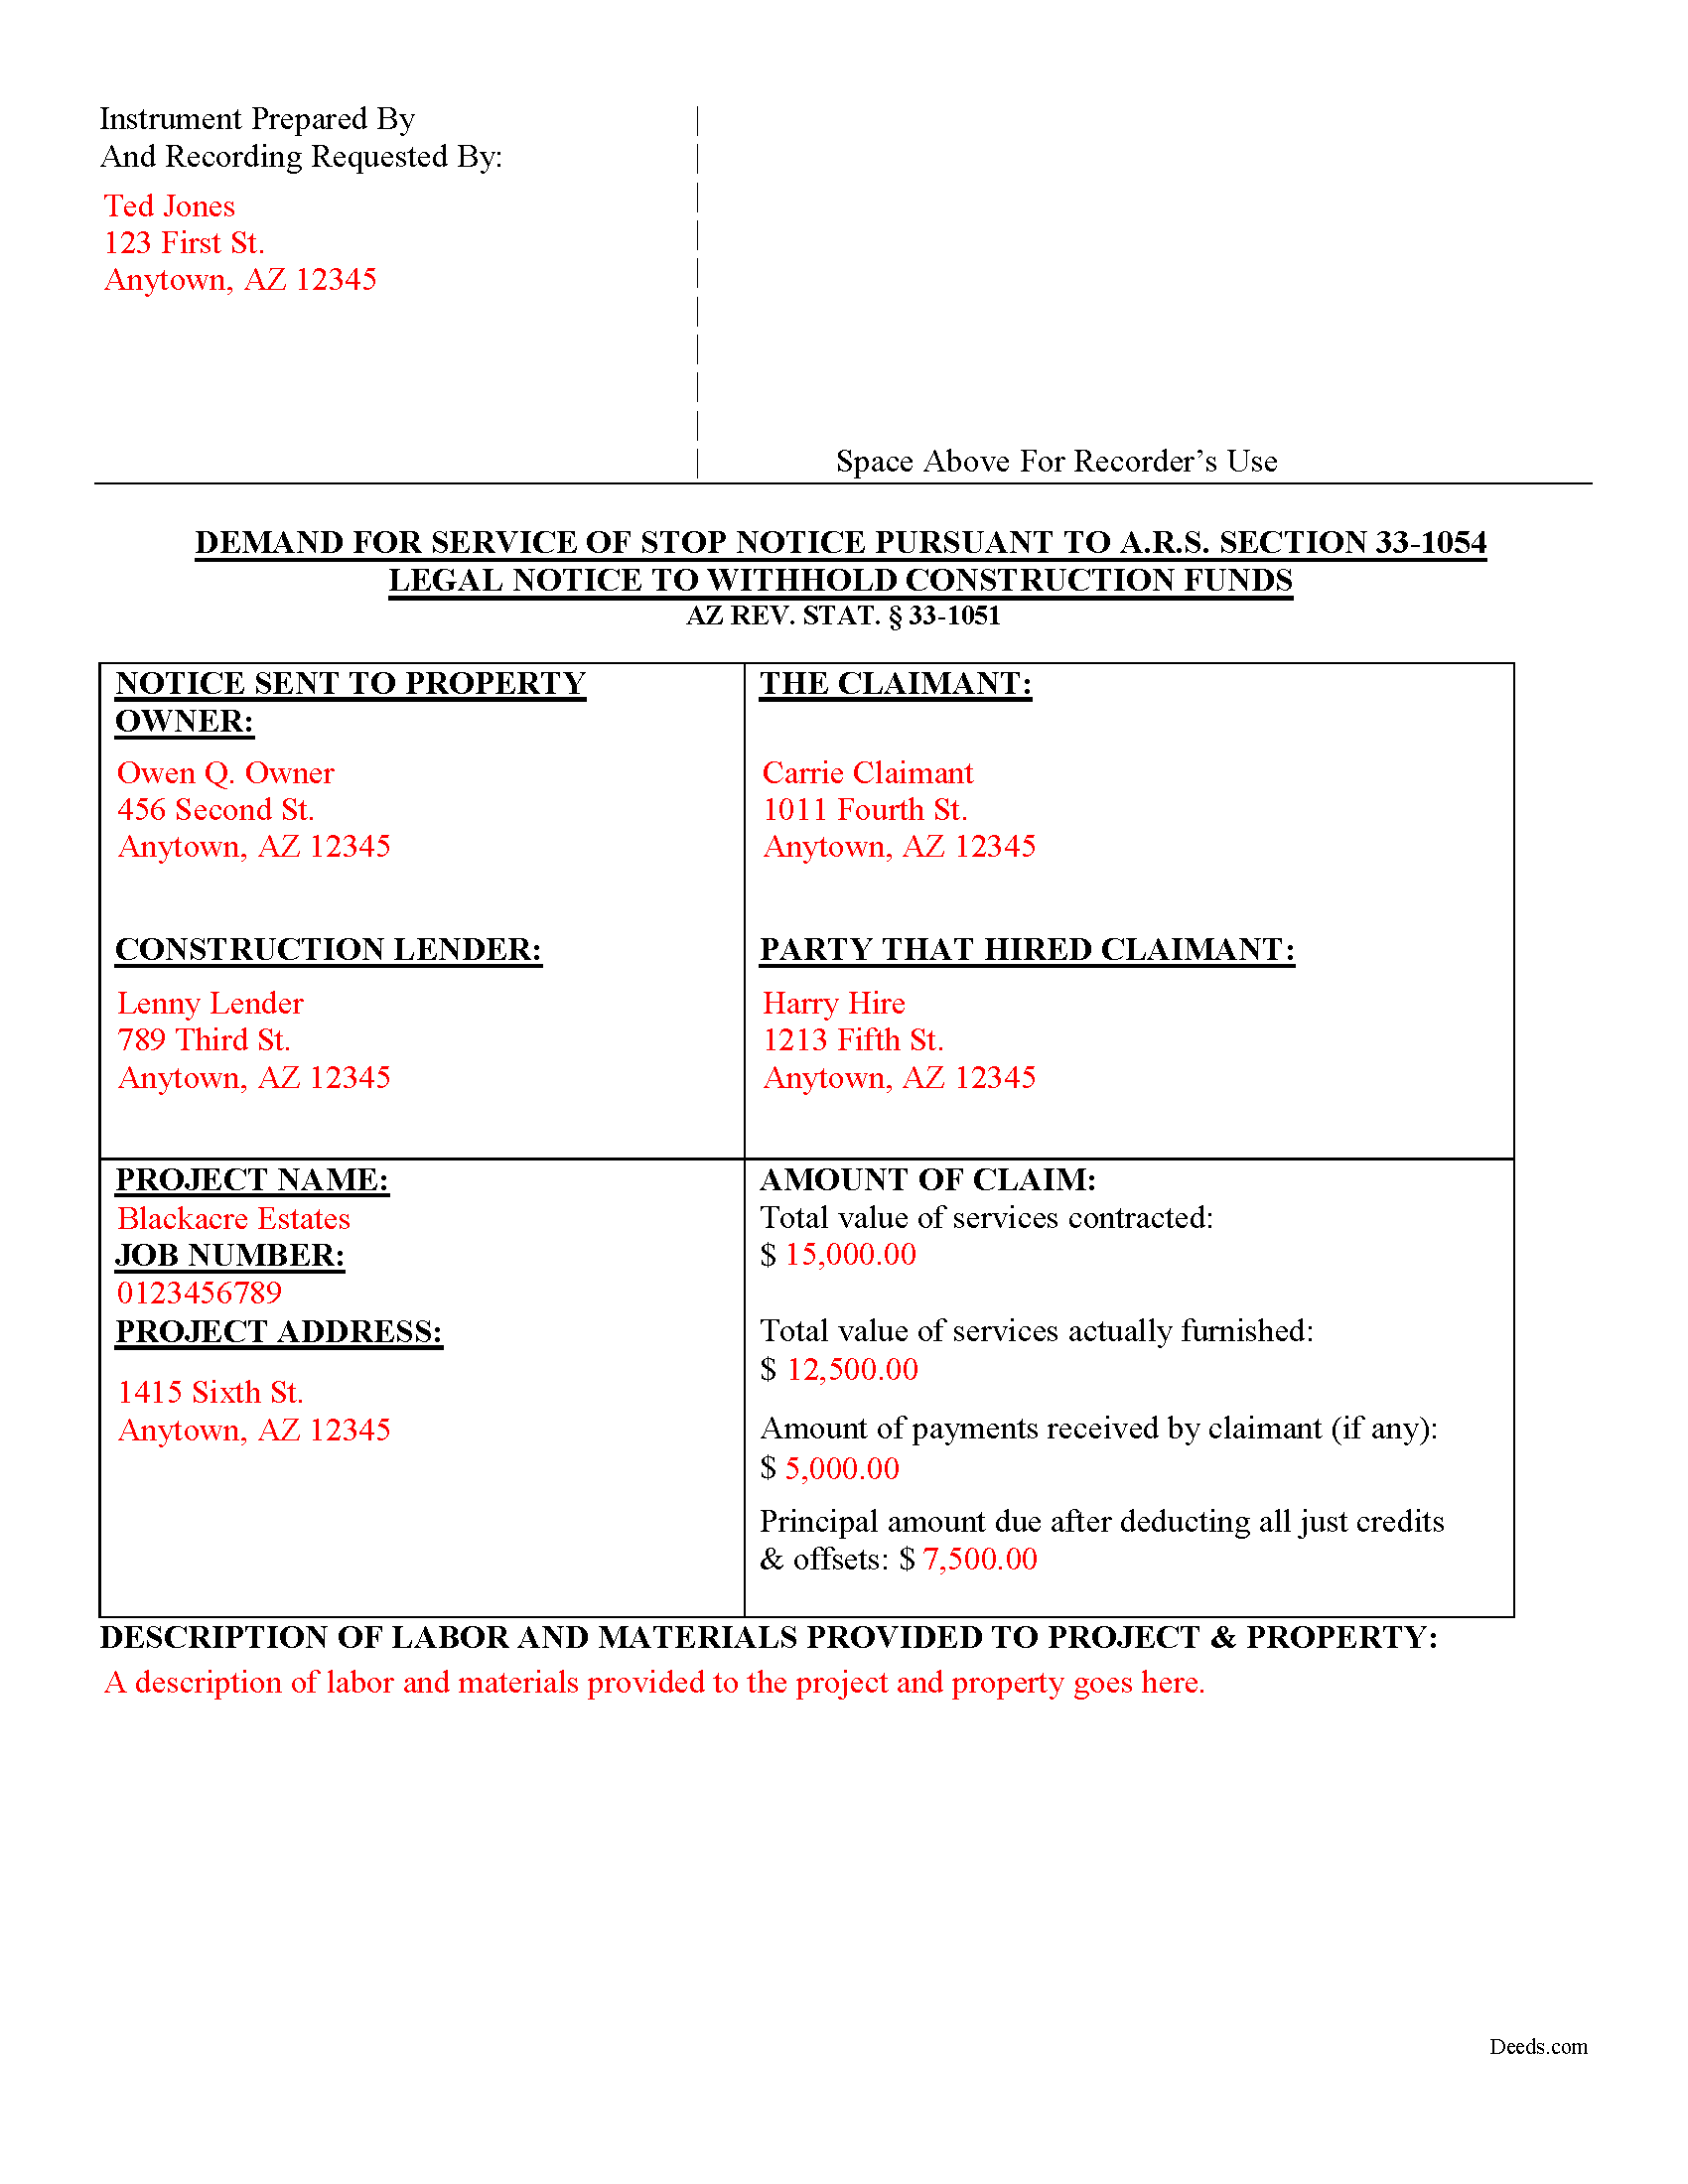 Completed Example of the Work Stop Notice Document